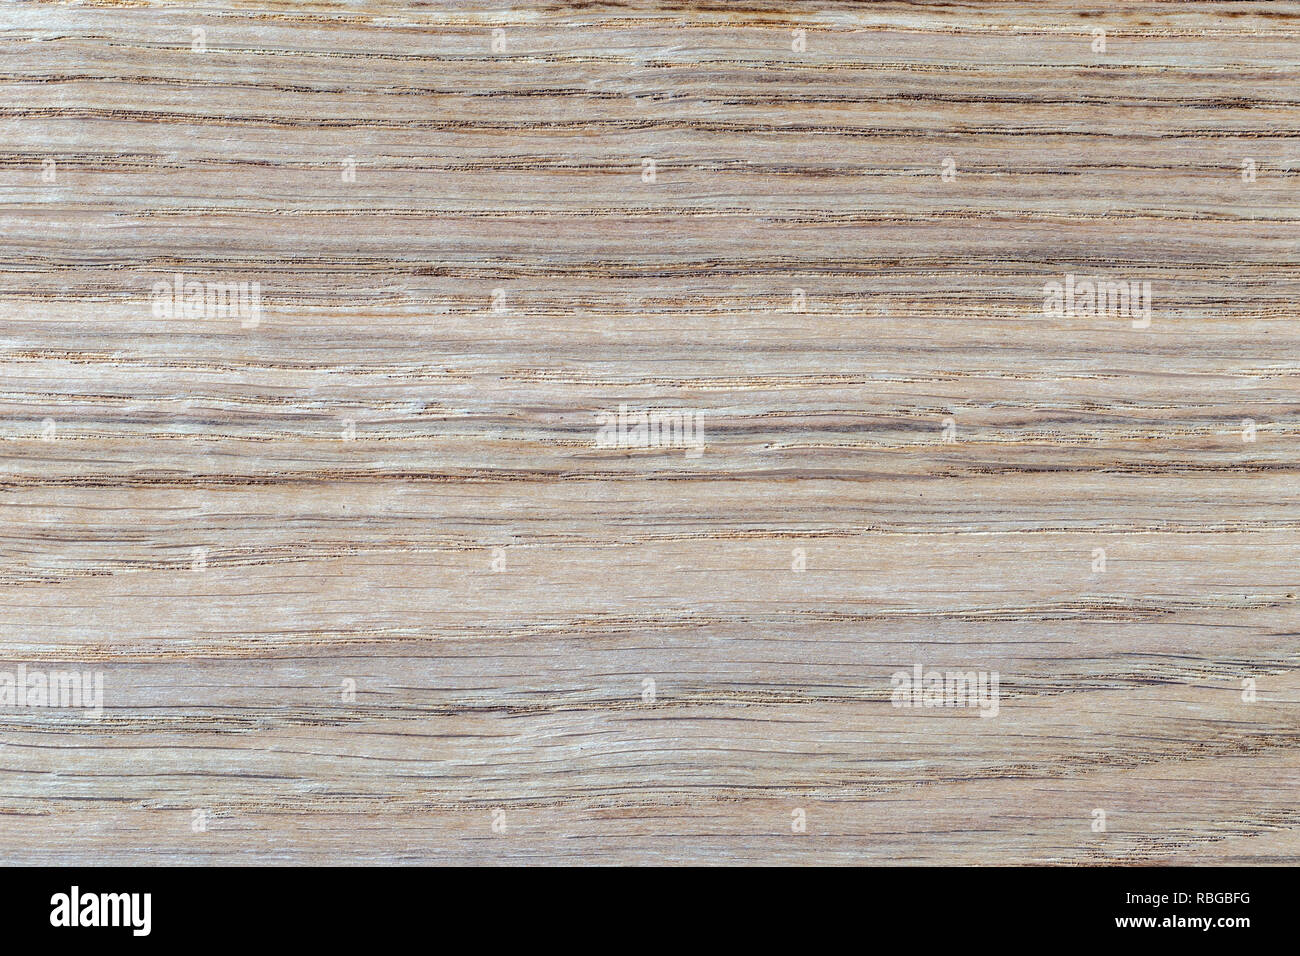 Wooden veneer to use as a background. Stock Photo